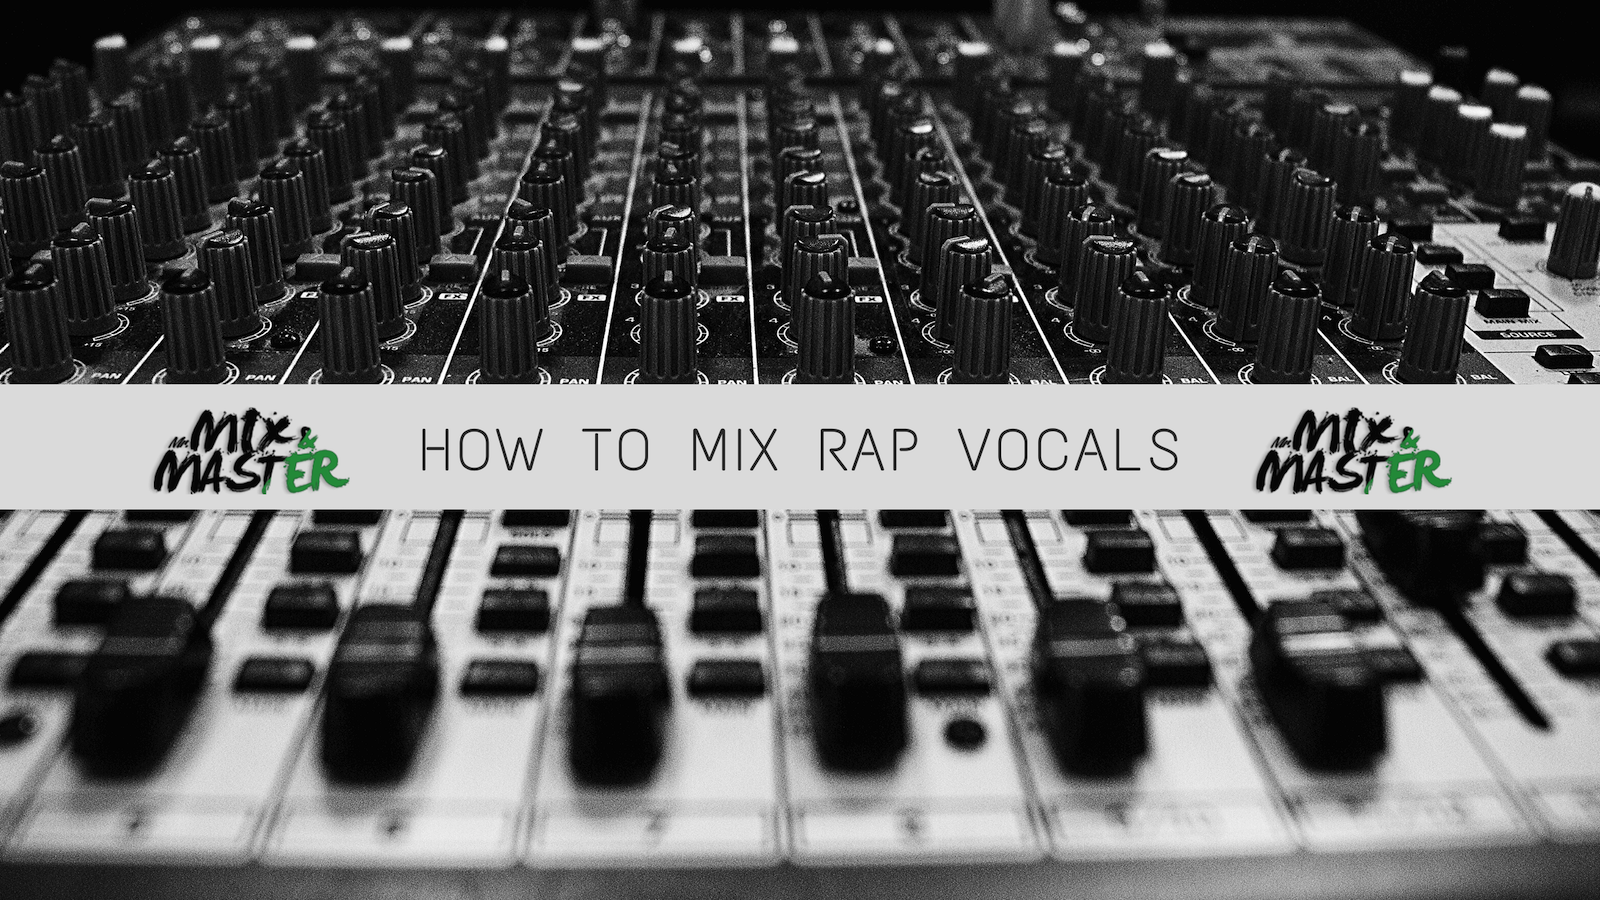 How to mix lead rap vocals by multi-platinum online music mixer Vinny D. Explaining how to mix rap vocals along with vocal mixing tips and techniques.